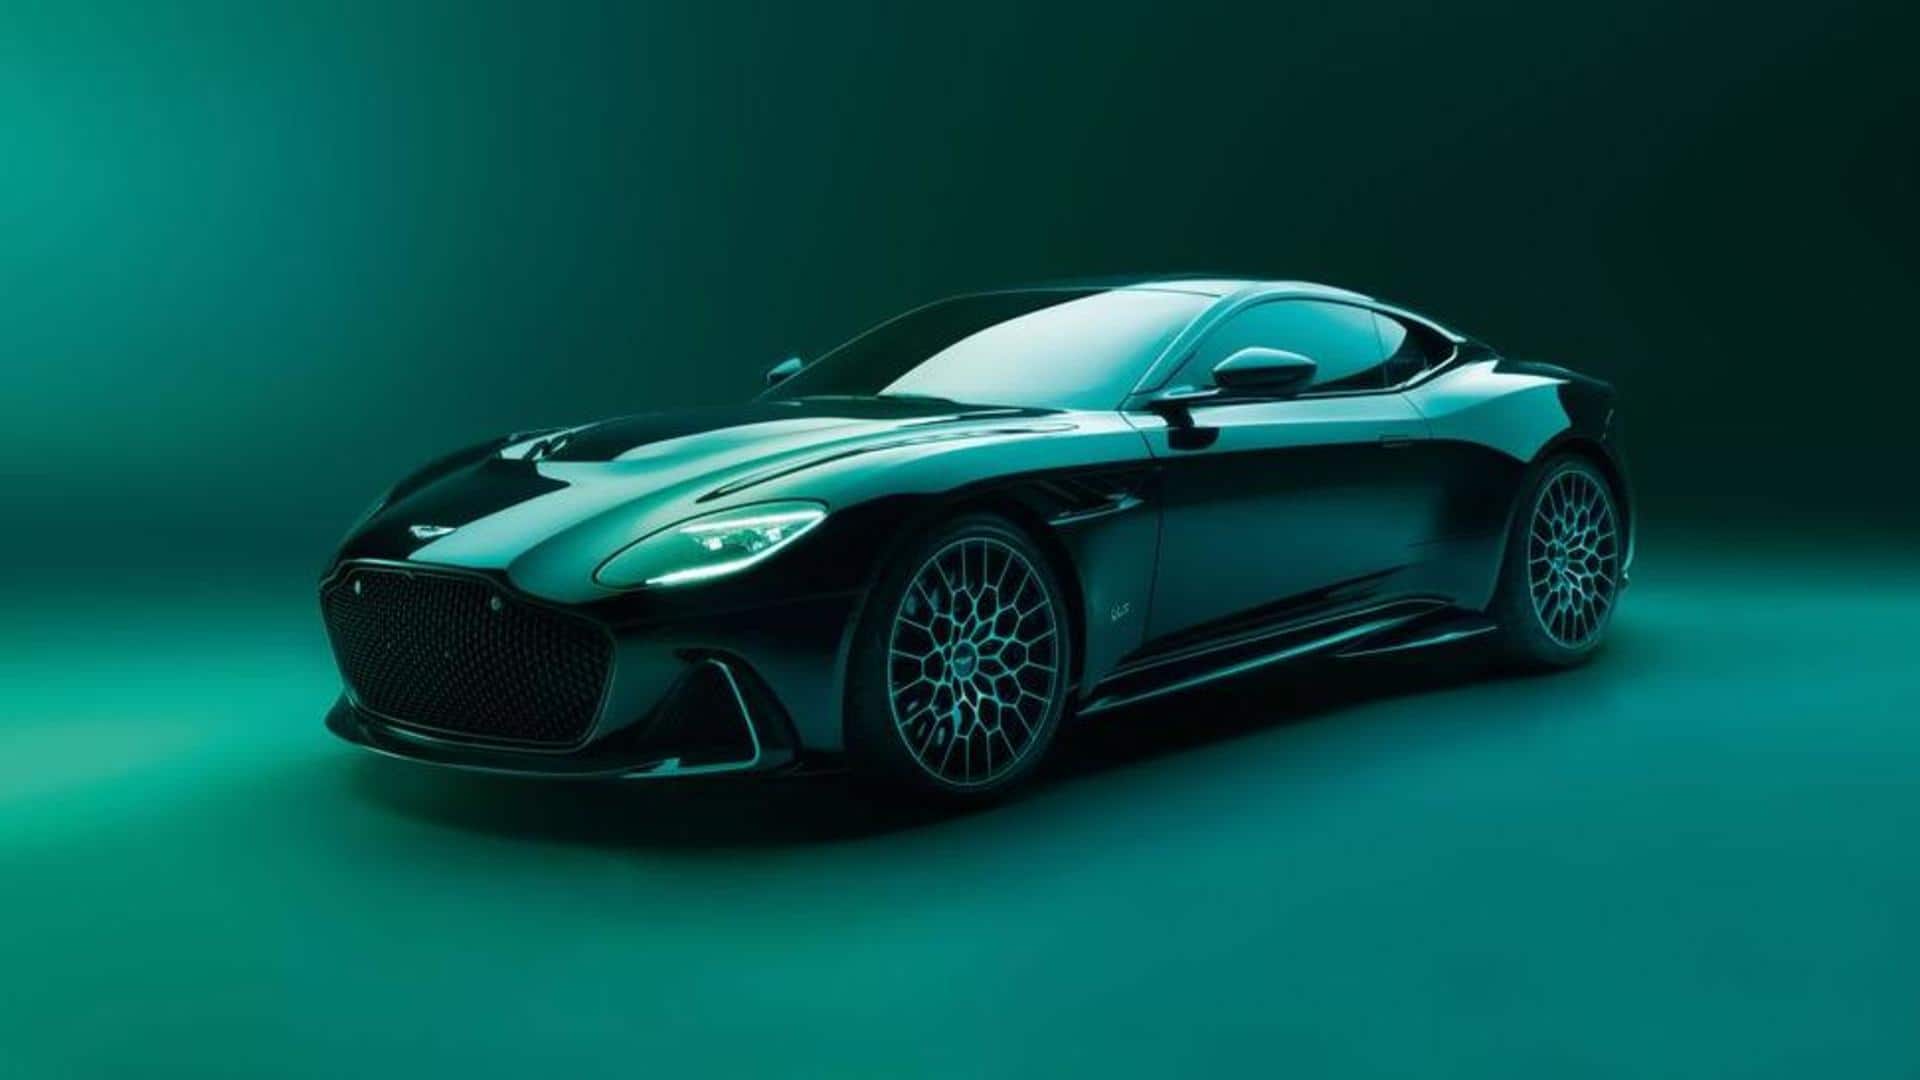 Aston-Martin DBS 770 Ultimate debuts as brand's most-powerful car ever